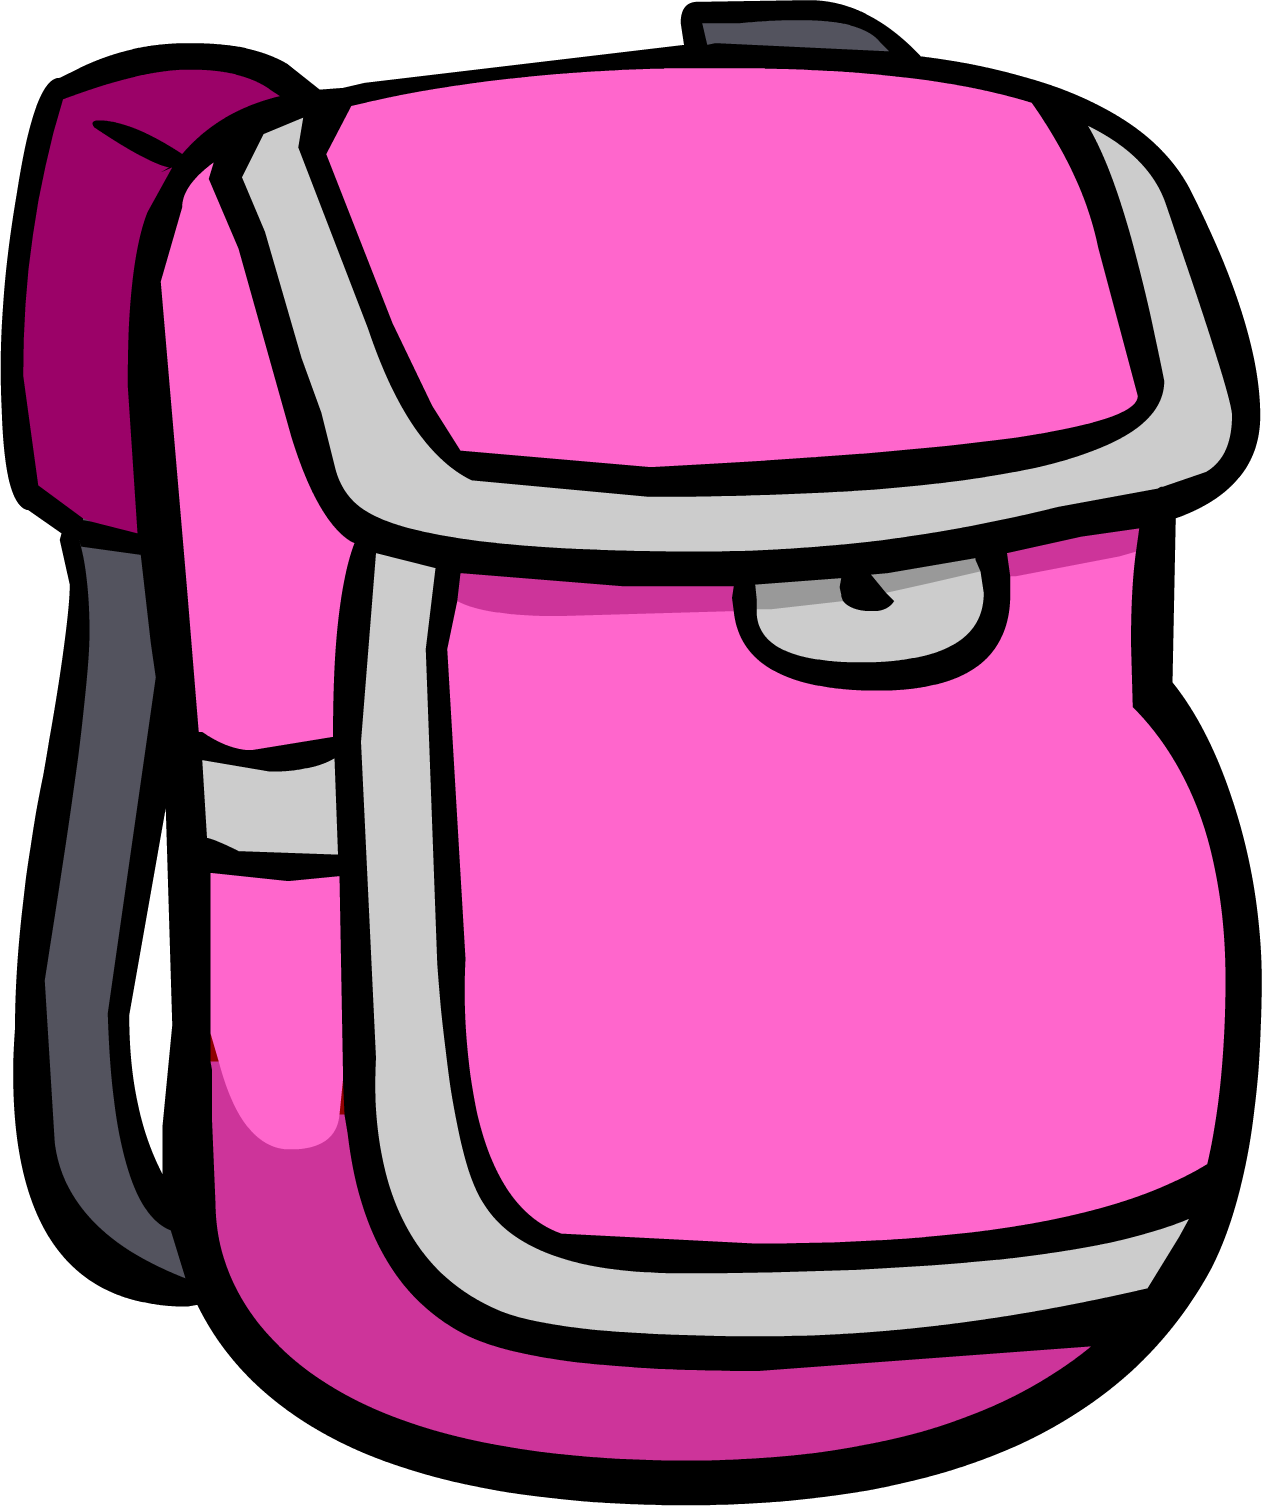 Pink Backpack - Red Backpack (1262x1506)